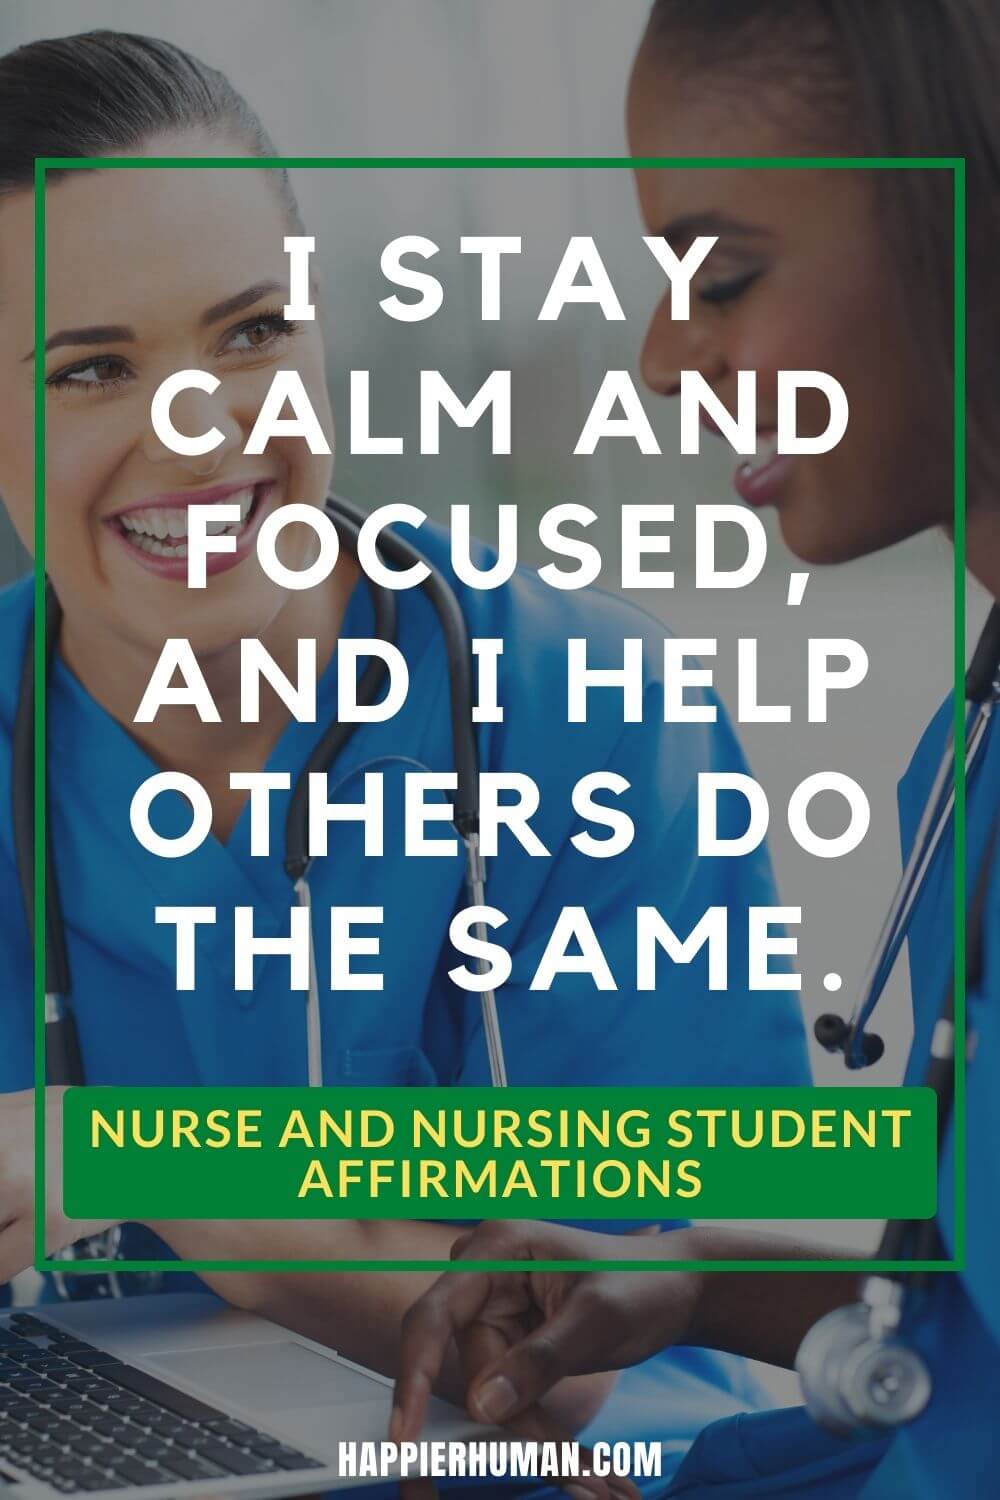 Nurse Affirmations - I stay calm and focused, and I help others do the same. | affirmation cards for nurses | daily affirmations | nursing mantra